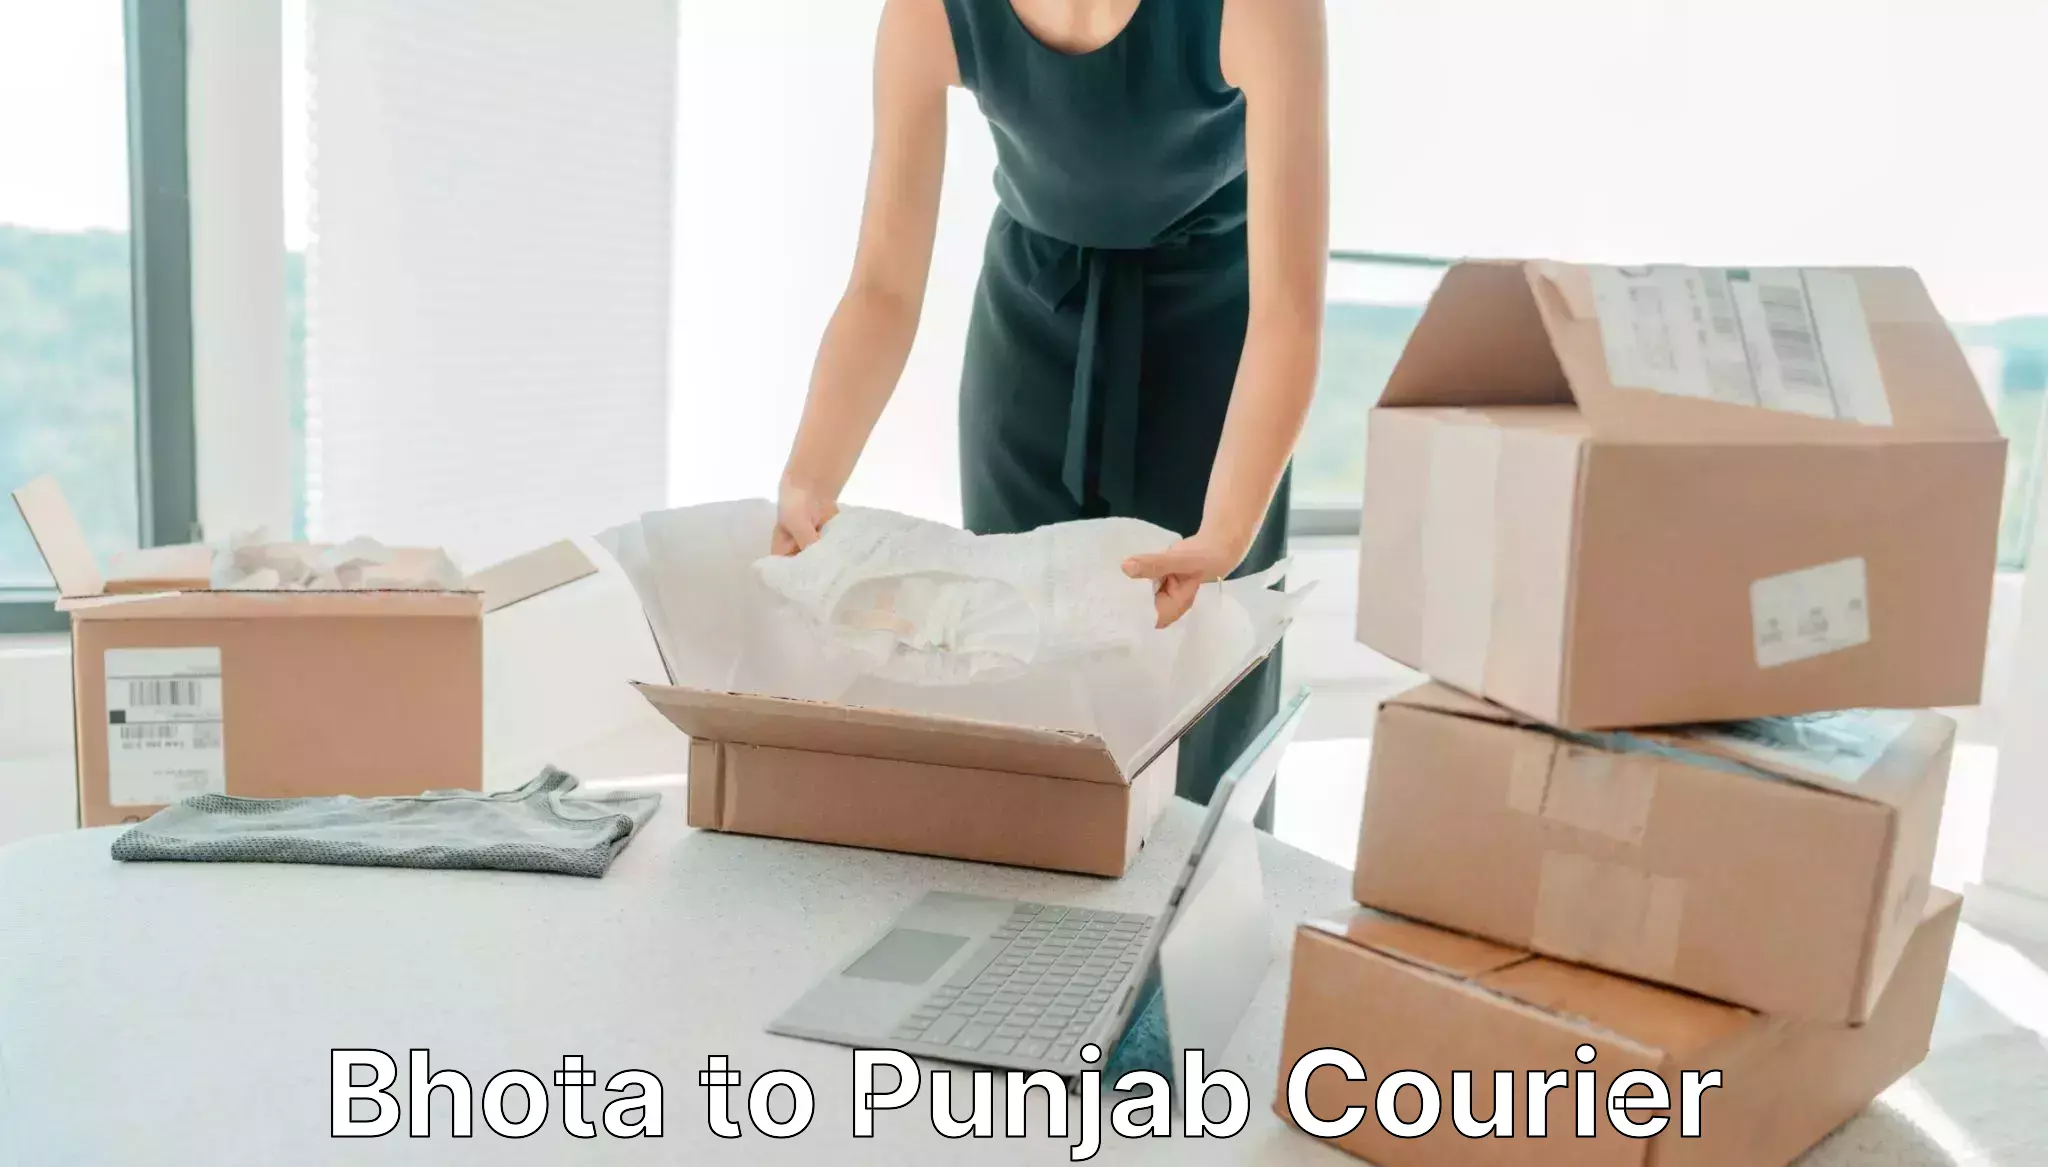 Expedited shipping methods in Bhota to Sirhind Fatehgarh